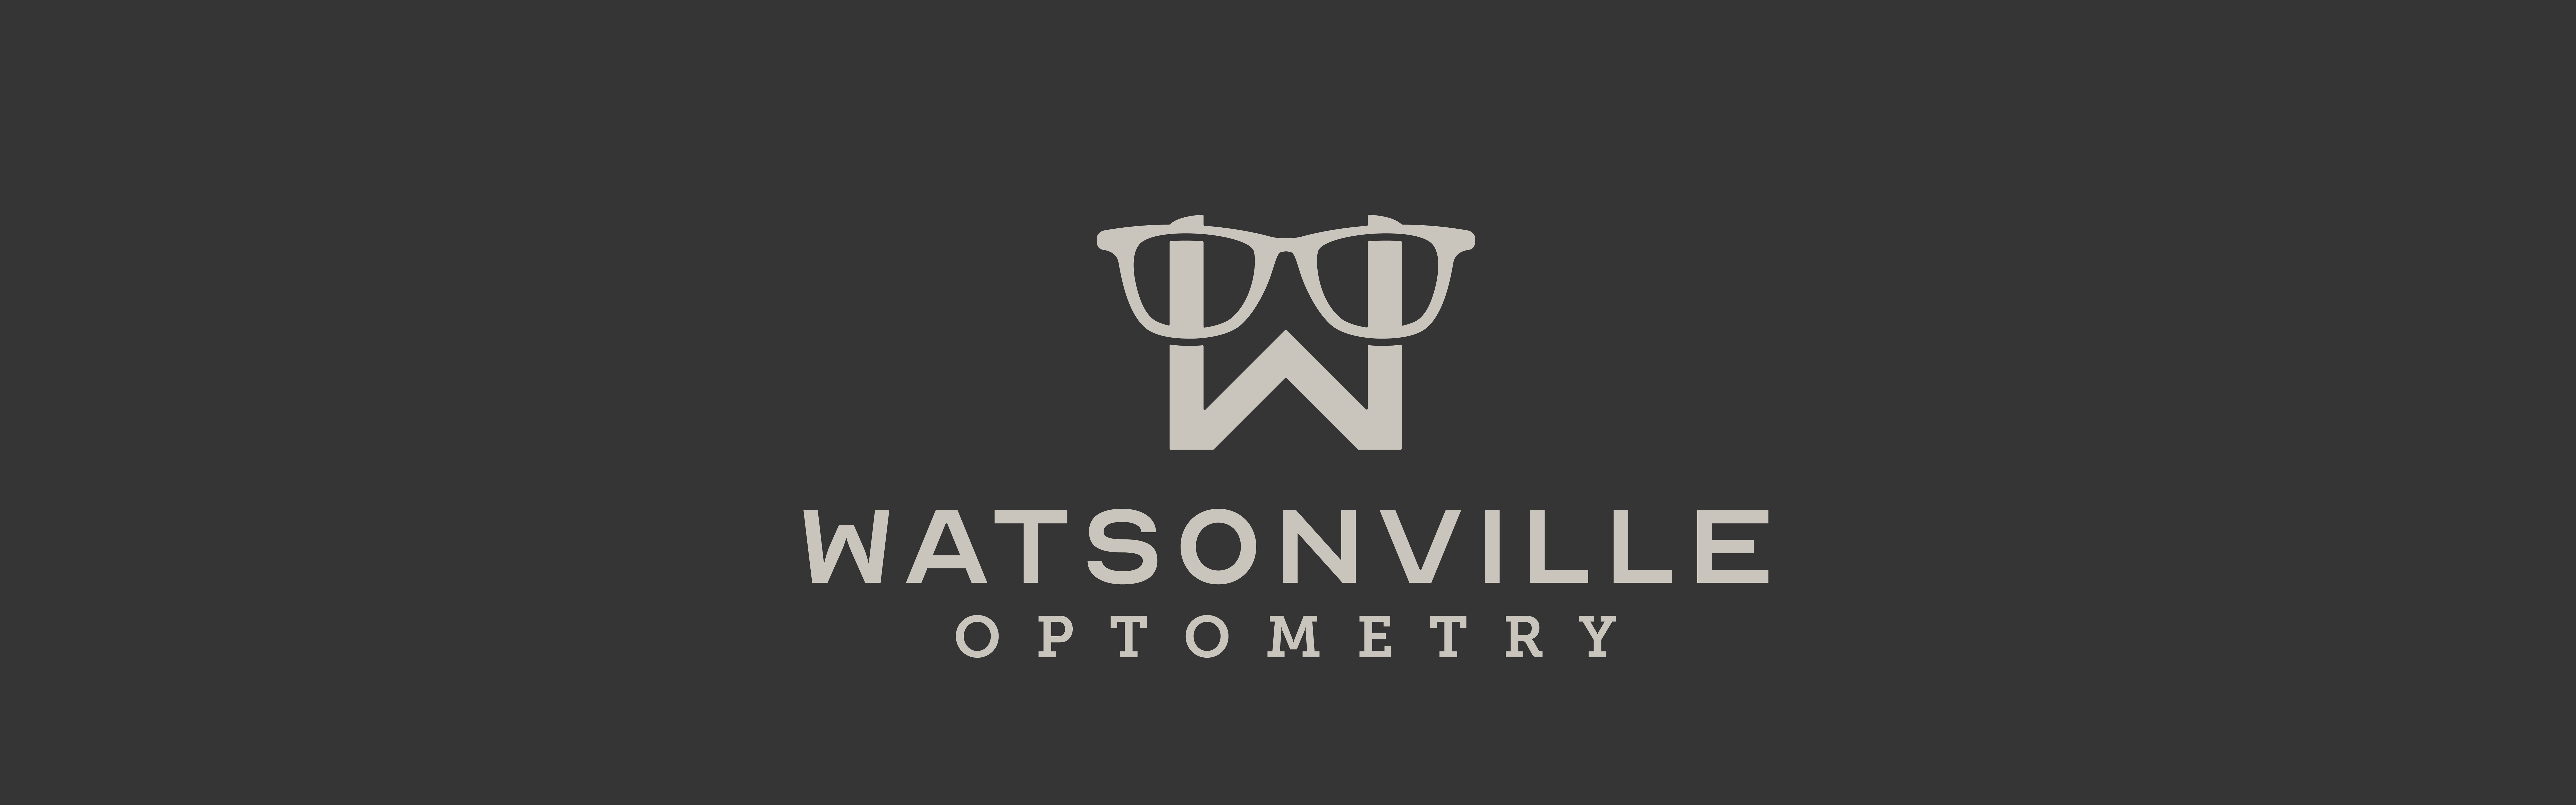 Logo of Watsonville Optometry featuring eyeglasses integrated with the letter "w" on a dark background.